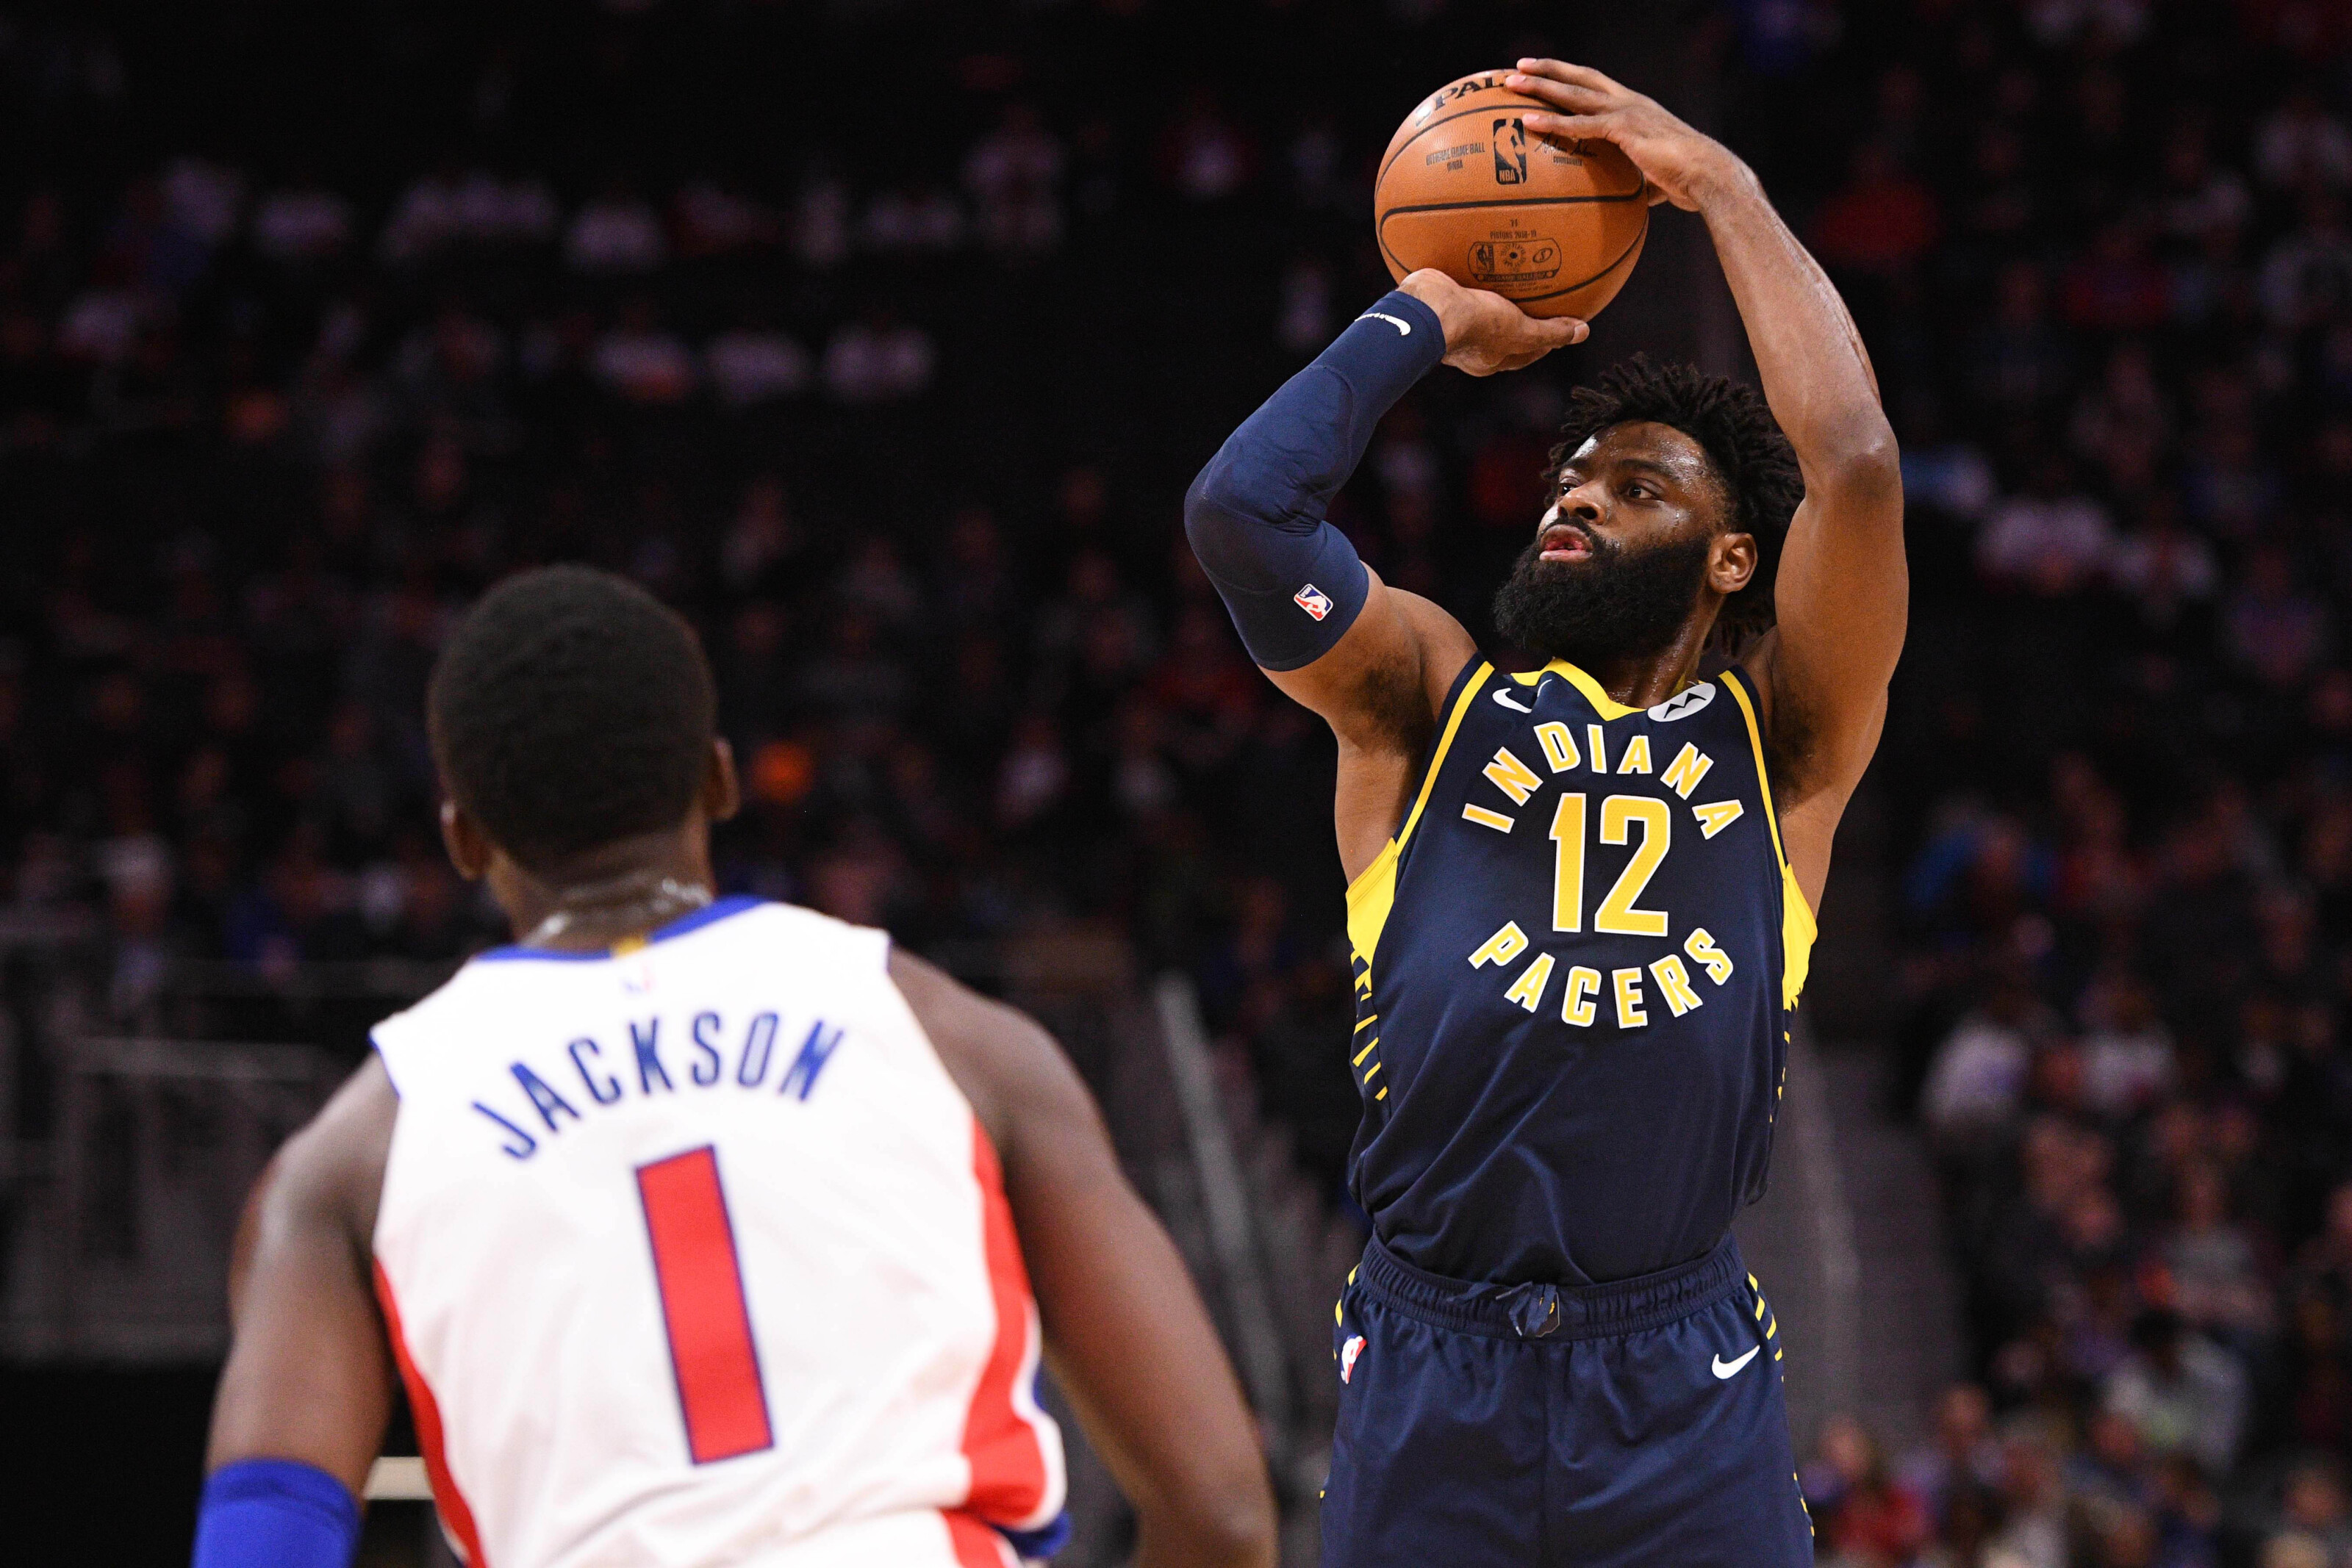 Indiana Pacers guard Tyreke Evans dismissed from NBA for two years